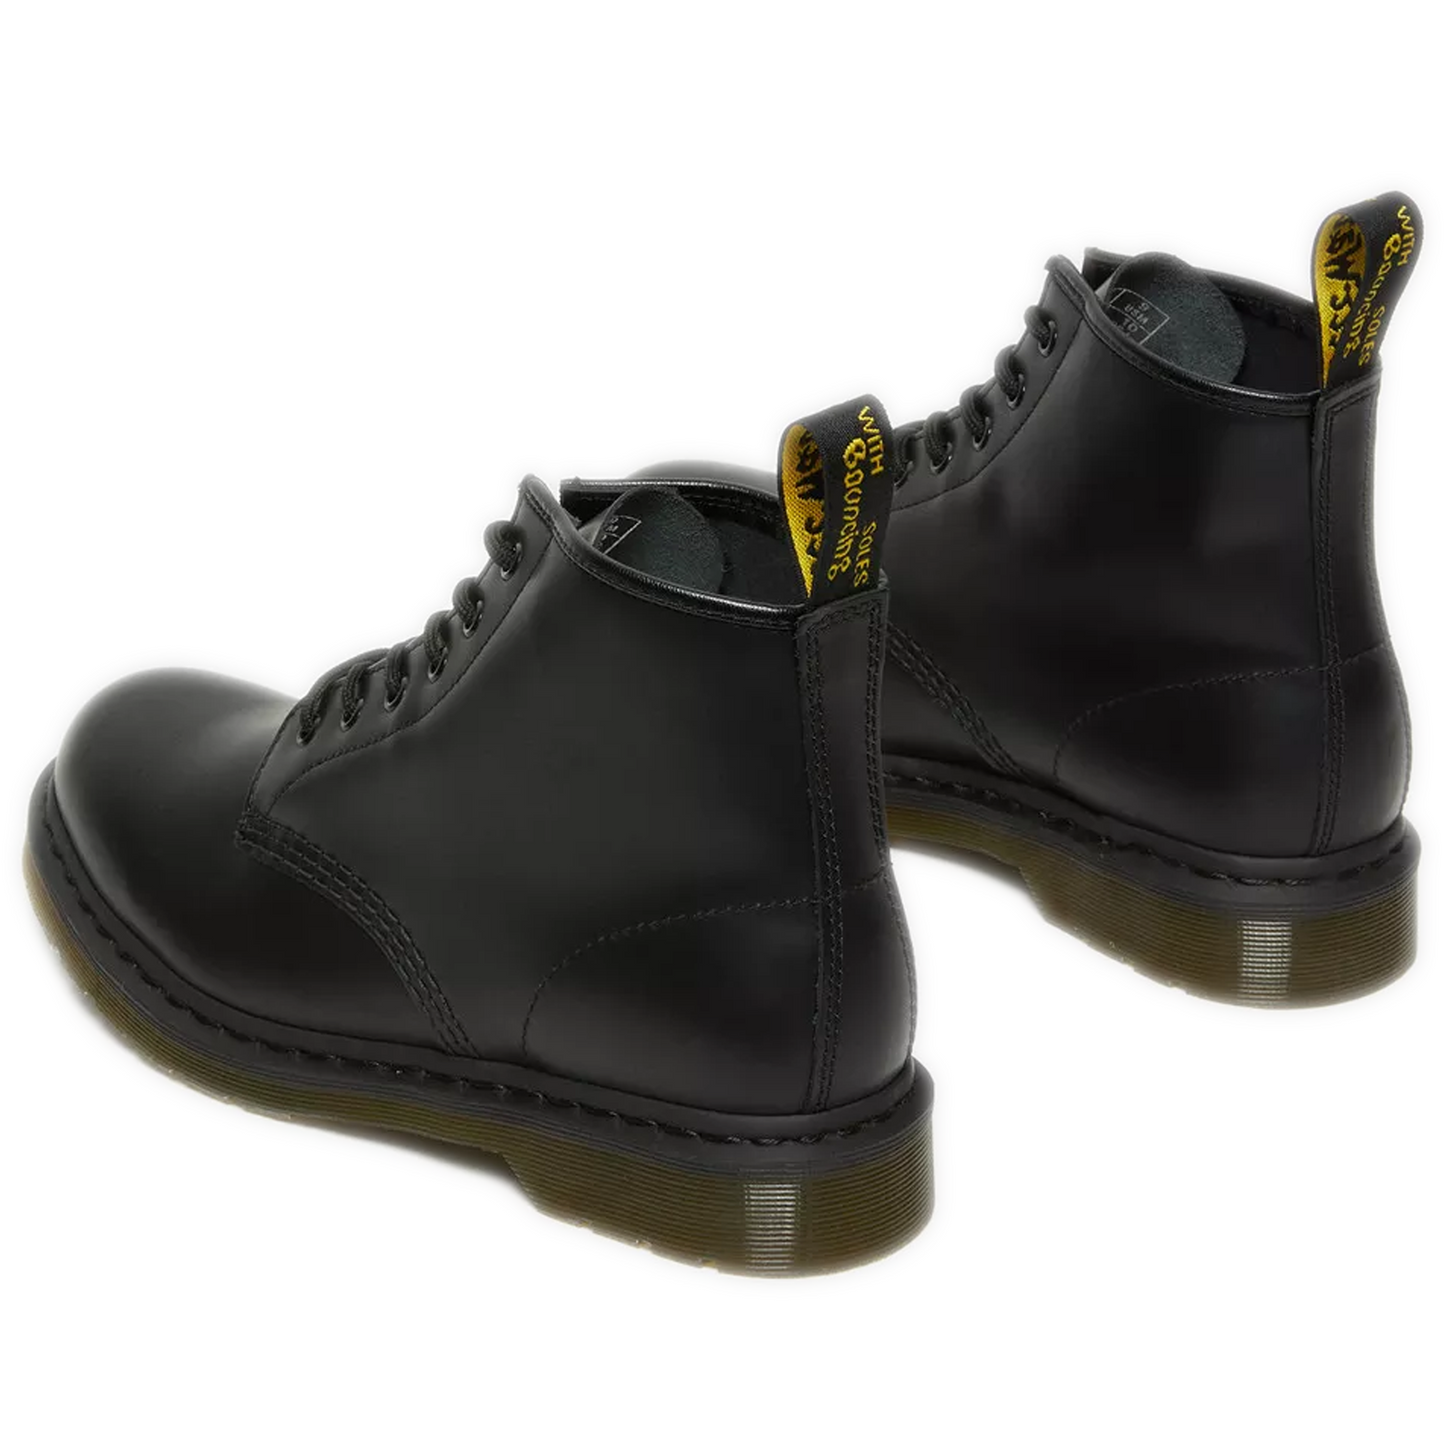 Women's Dr. Martens 101 Smooth Leather Ankle Boots - Black Smooth